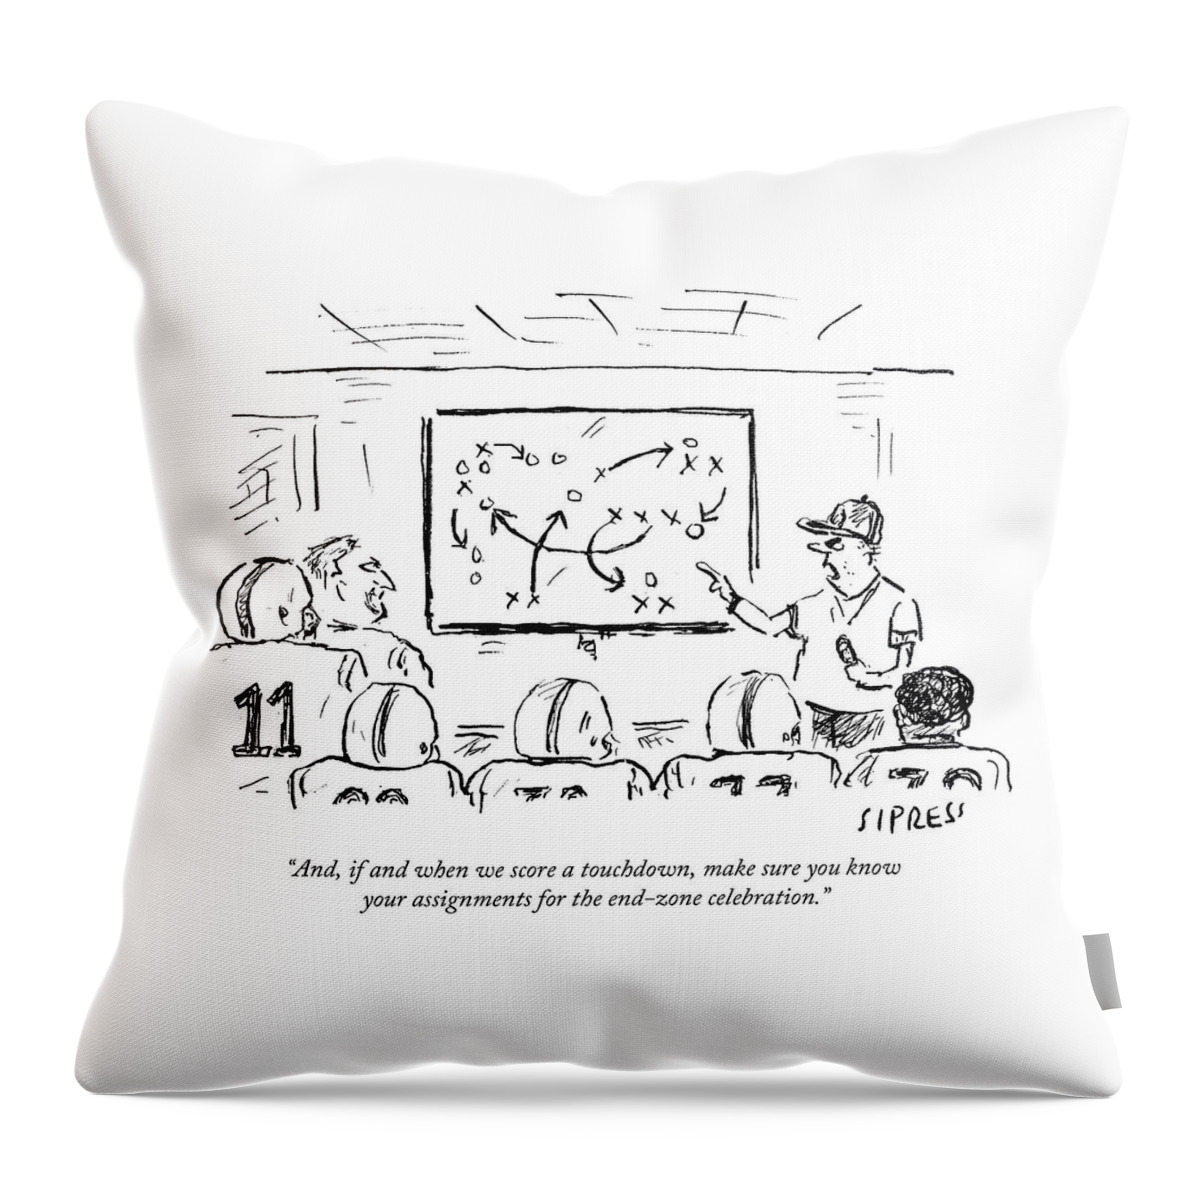 https://render.fineartamerica.com/images/rendered/default/throw-pillow/images-medium-5/assignments-for-the-end-zone-celebration-david-sipress.jpg?&targetx=48&targety=83&imagewidth=383&imageheight=312&modelwidth=479&modelheight=479&backgroundcolor=ffffff&orientation=0&producttype=throwpillow-14-14